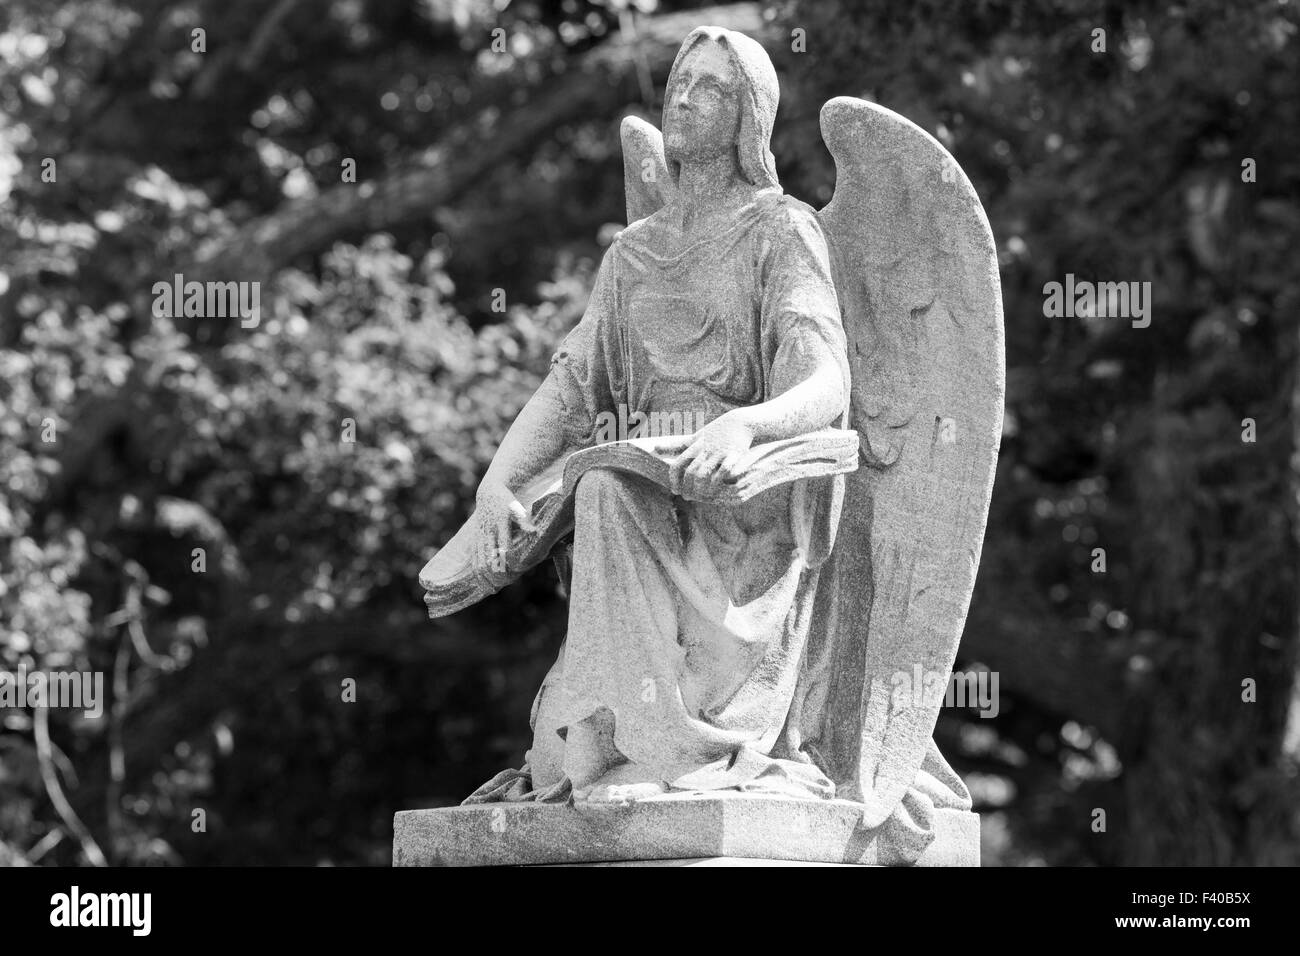 Cemetery Angel With Big Book Stock Photo